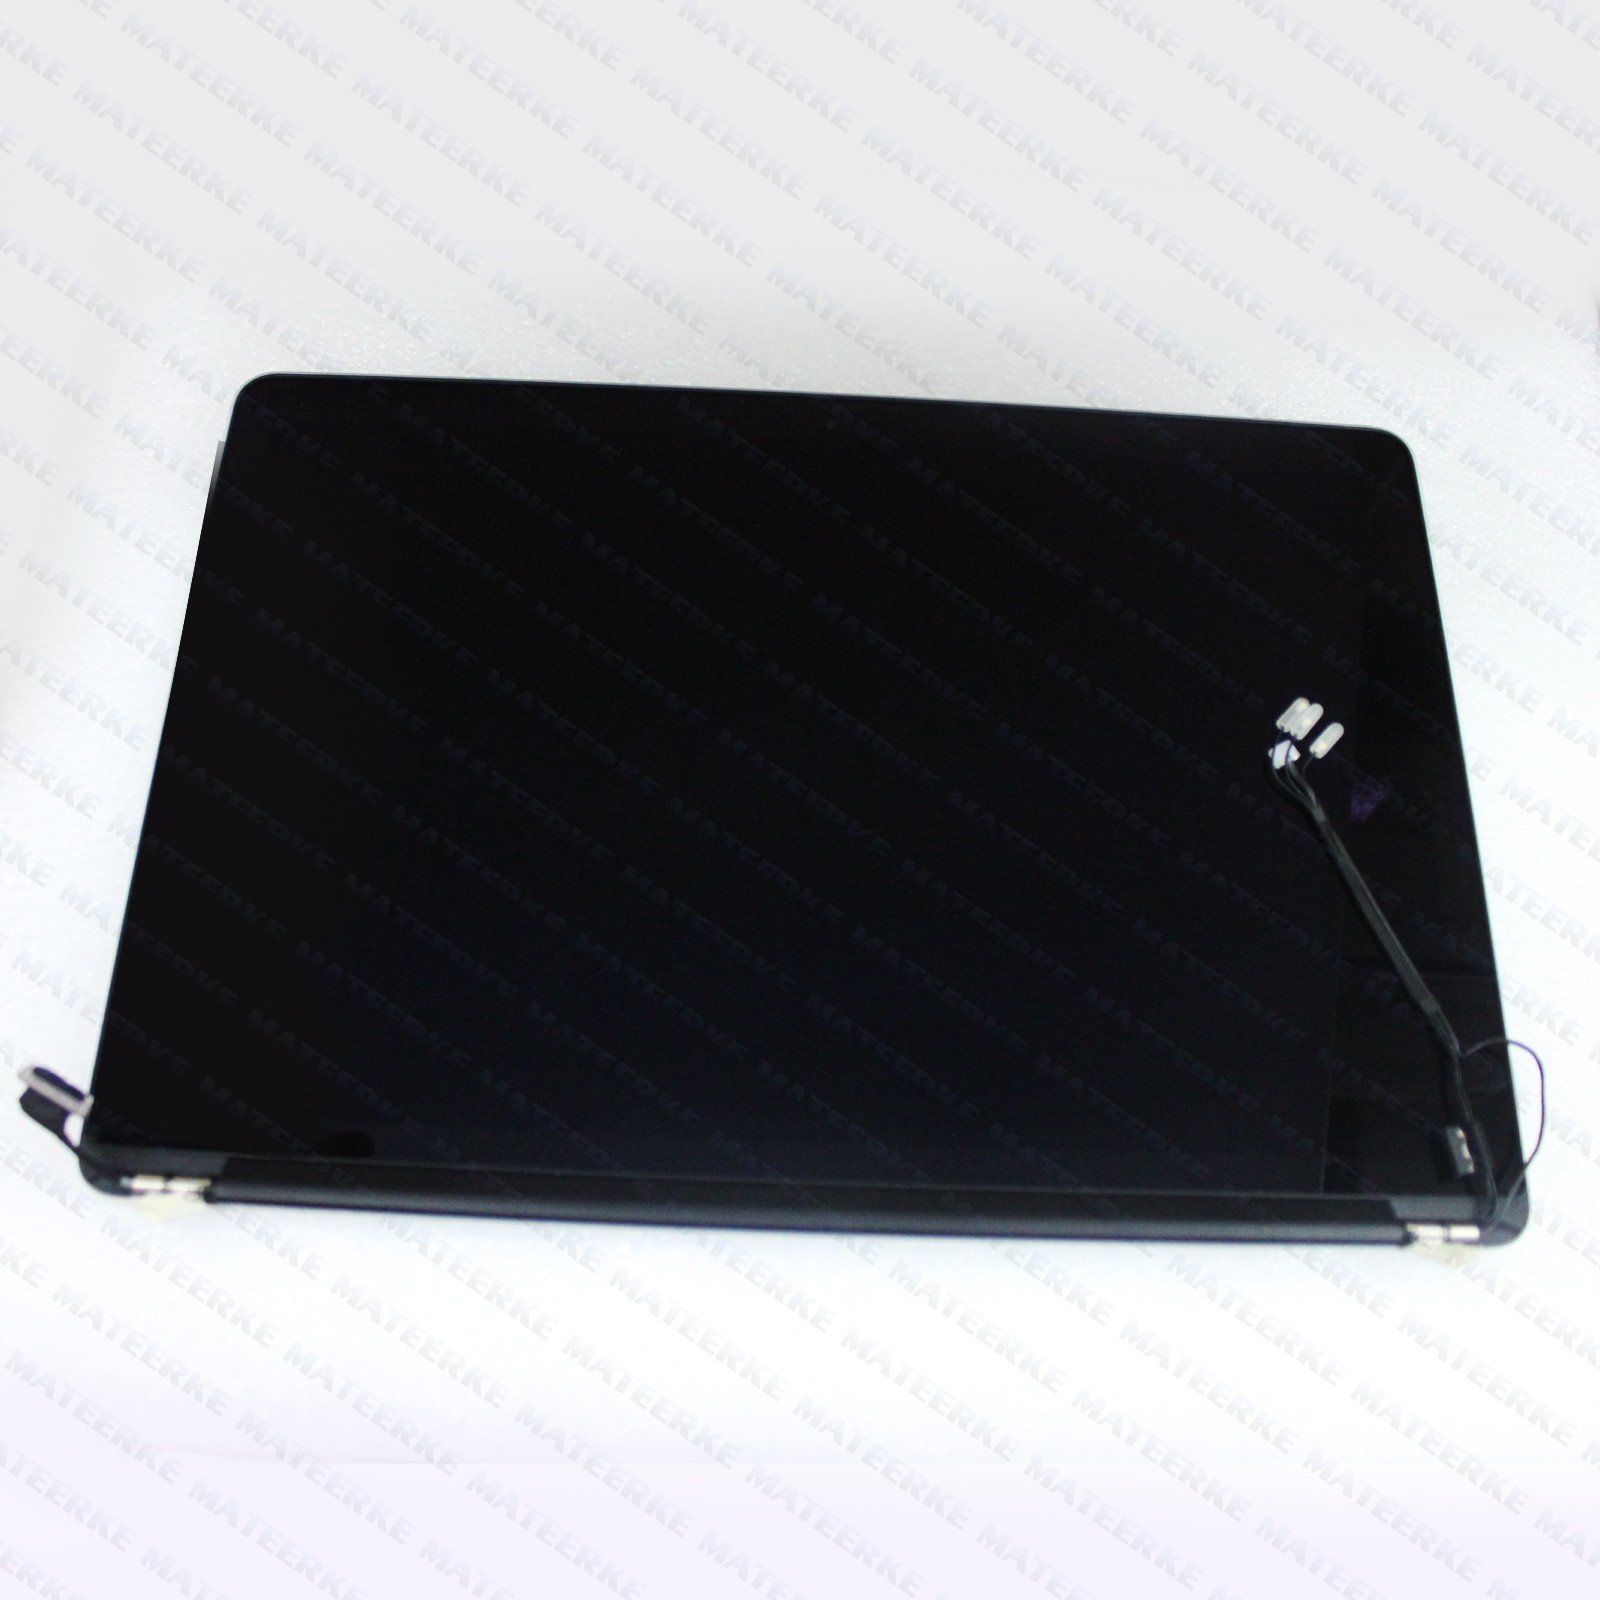 New Display Full LCD Screen Assembly For Mid 2012 MacBook Pro 15" A1398 Retina